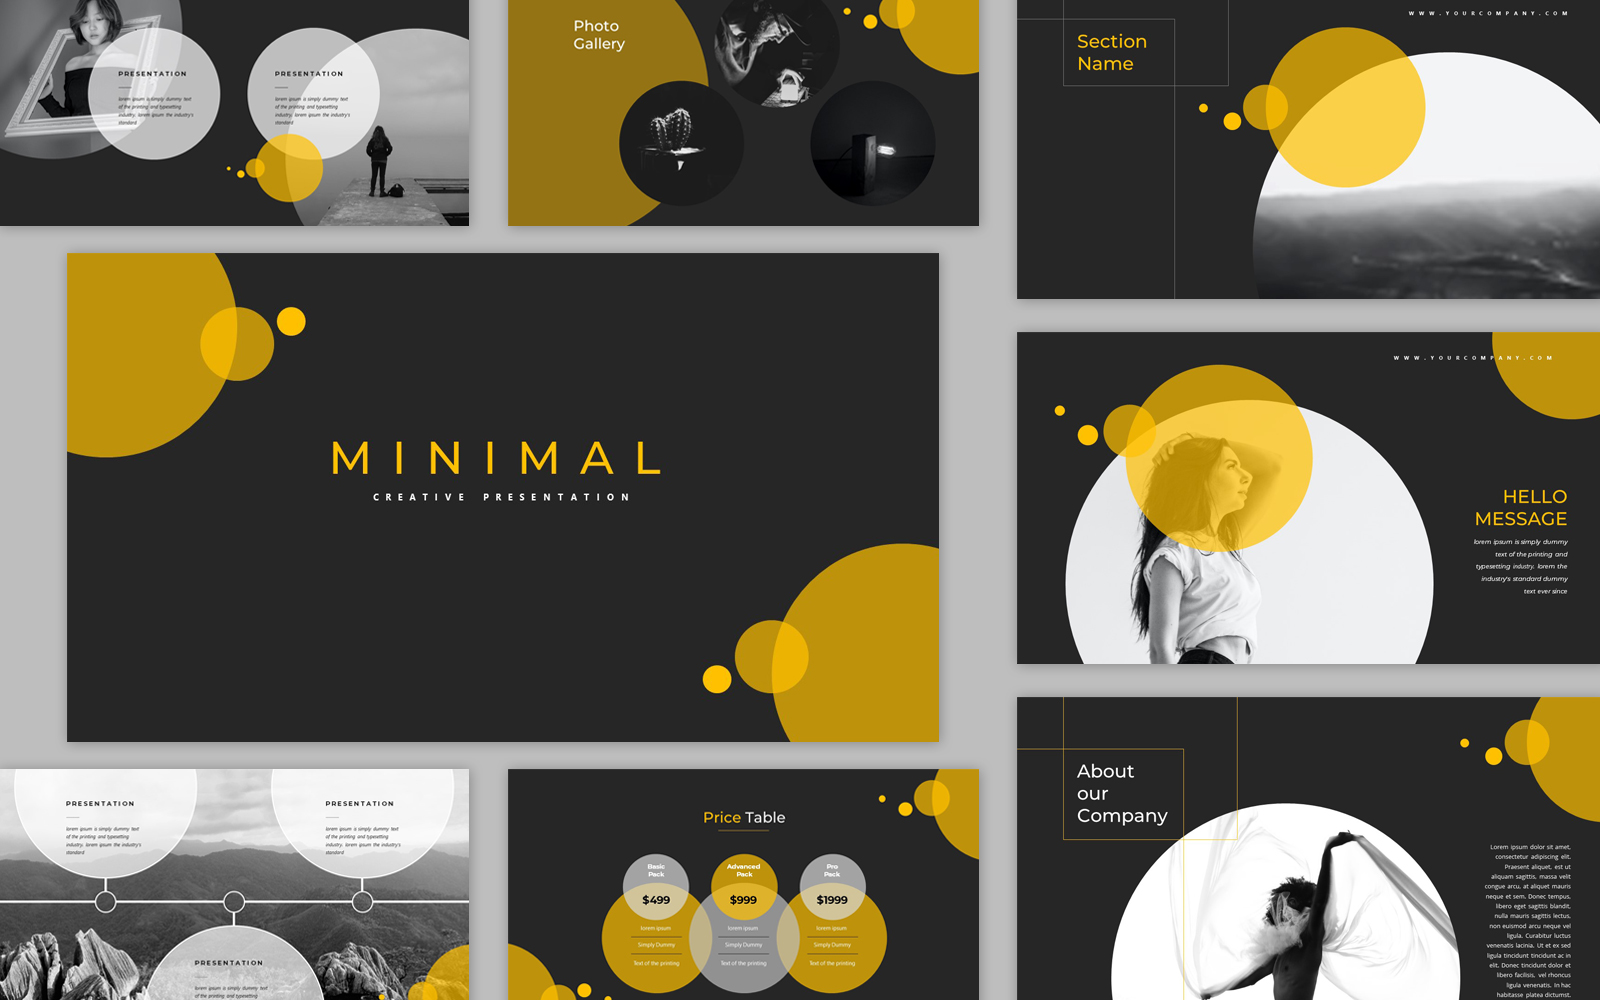 Black and Yellow Minimal Creative Presentation PowerPoint Template for Business